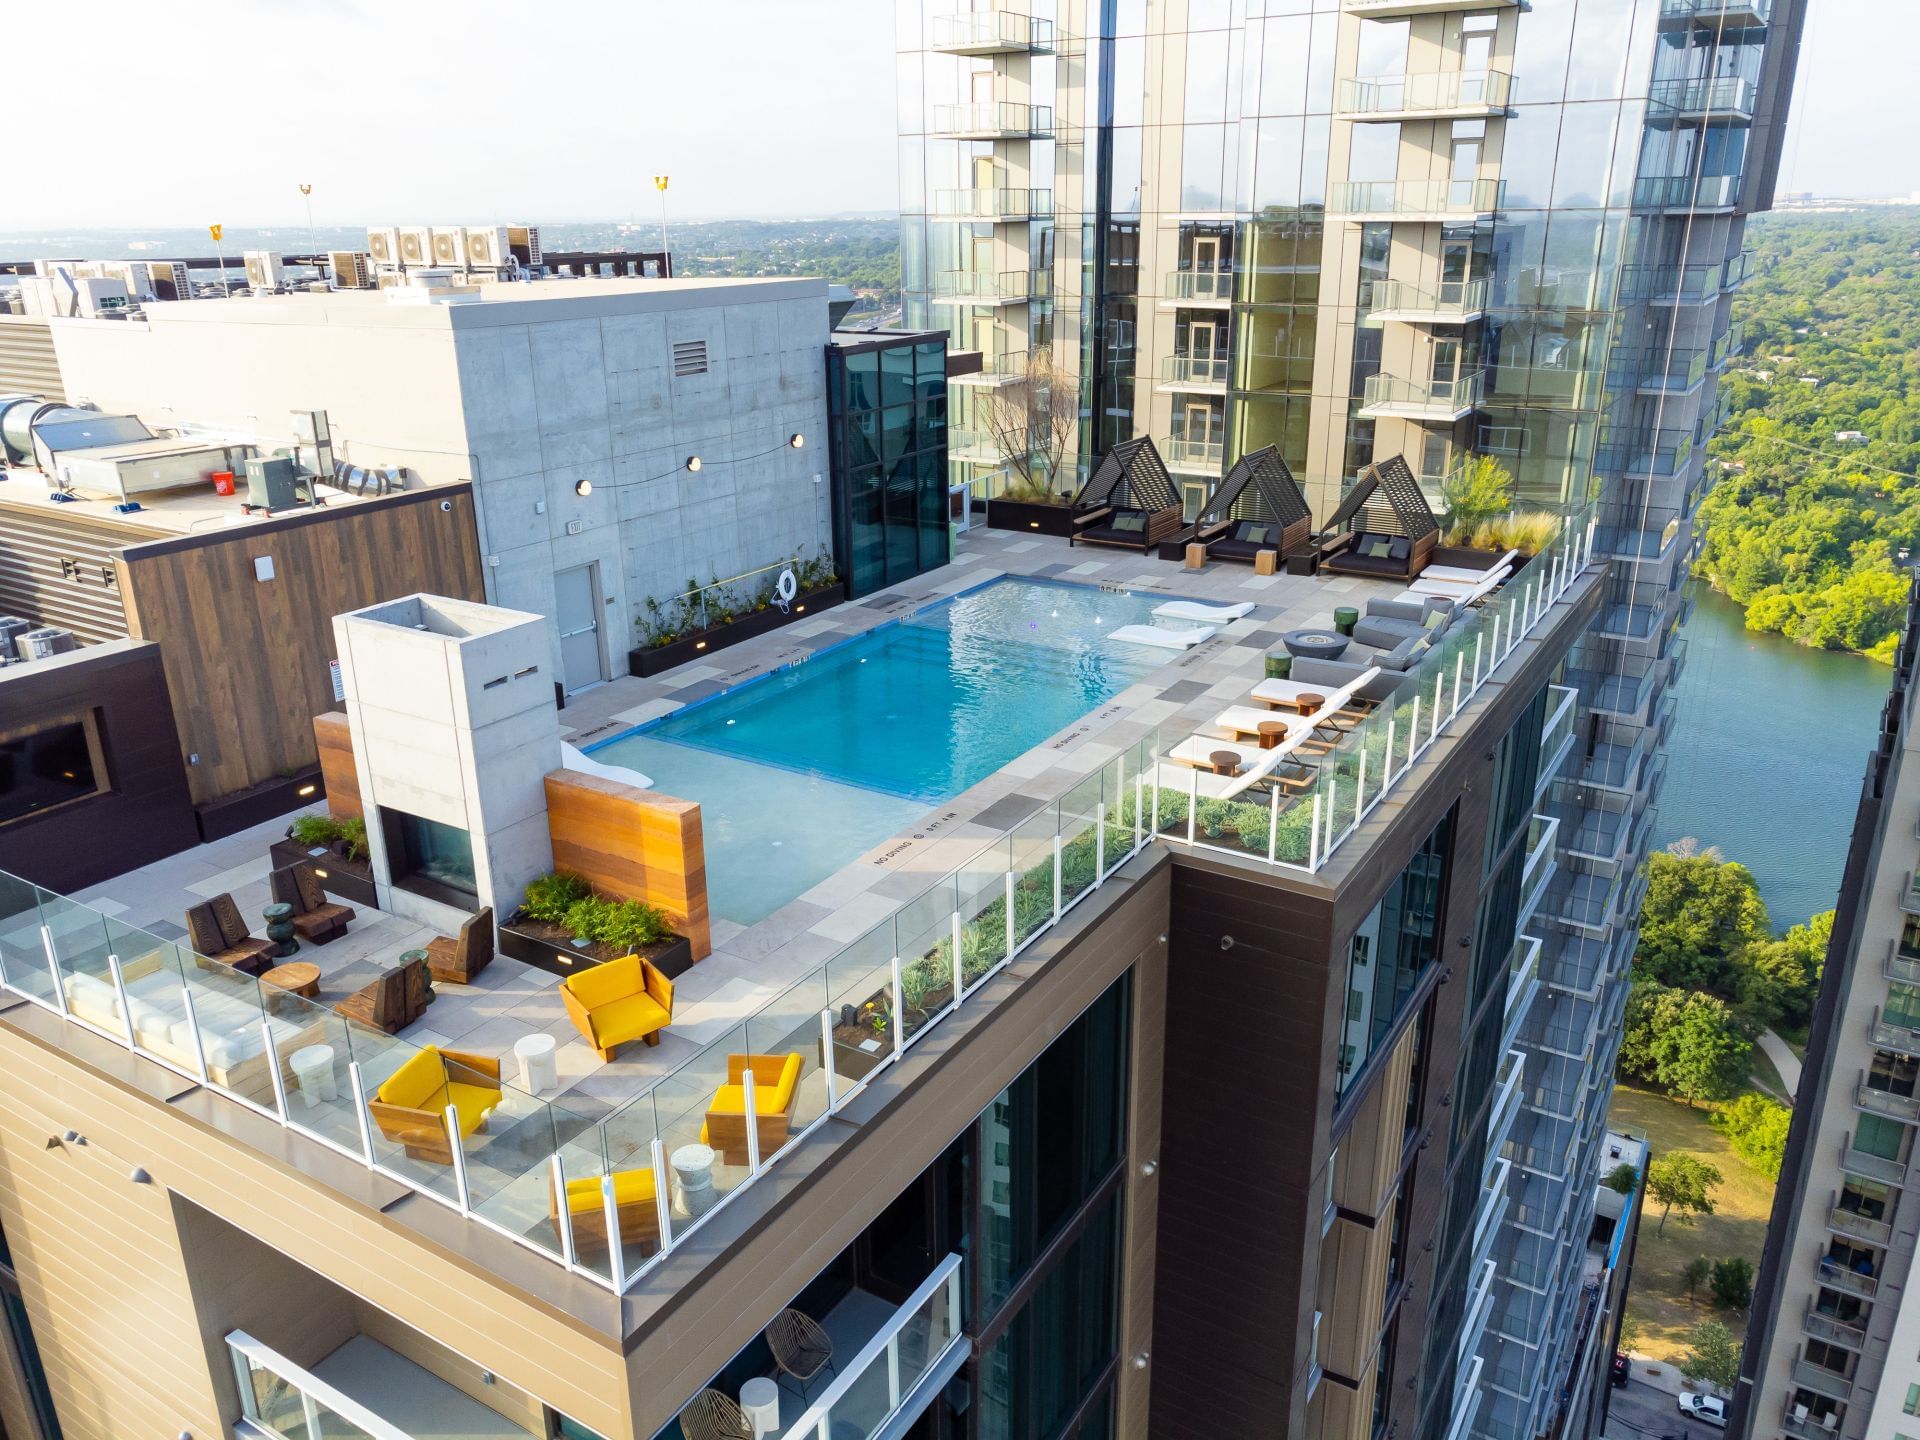 Aerial view of the Austin Condo Hotel with rooftop pool area